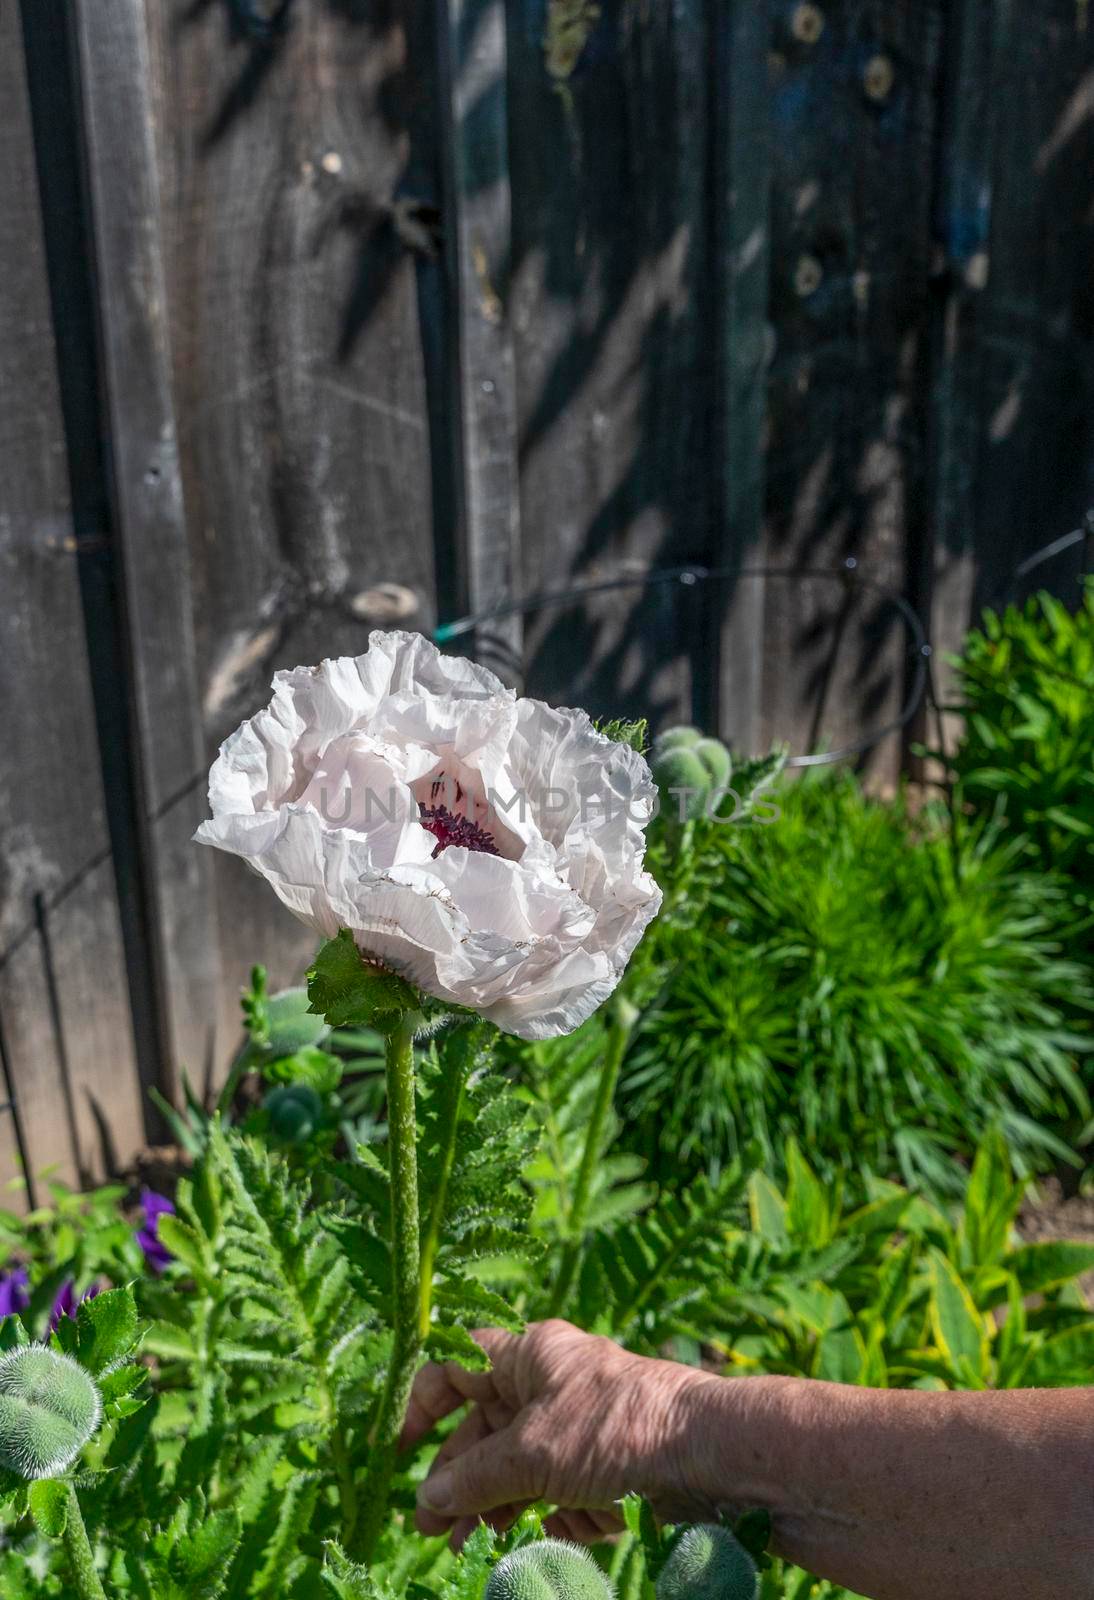 Hand holds a white poppy by the stem by ben44